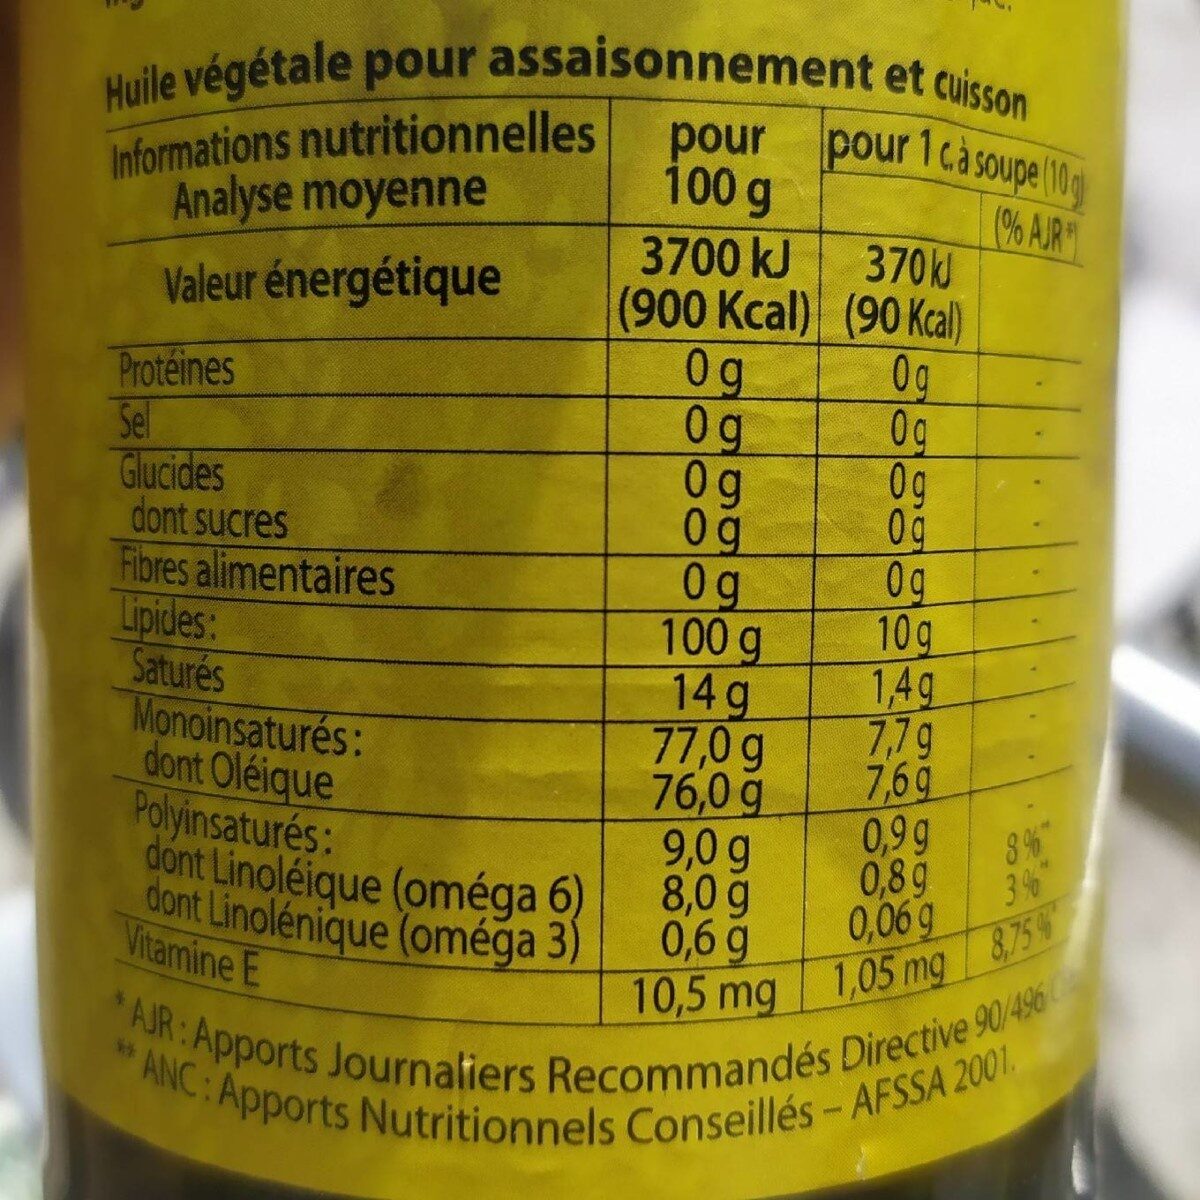 Huile d'olive Vierge Extra - Nutrition facts